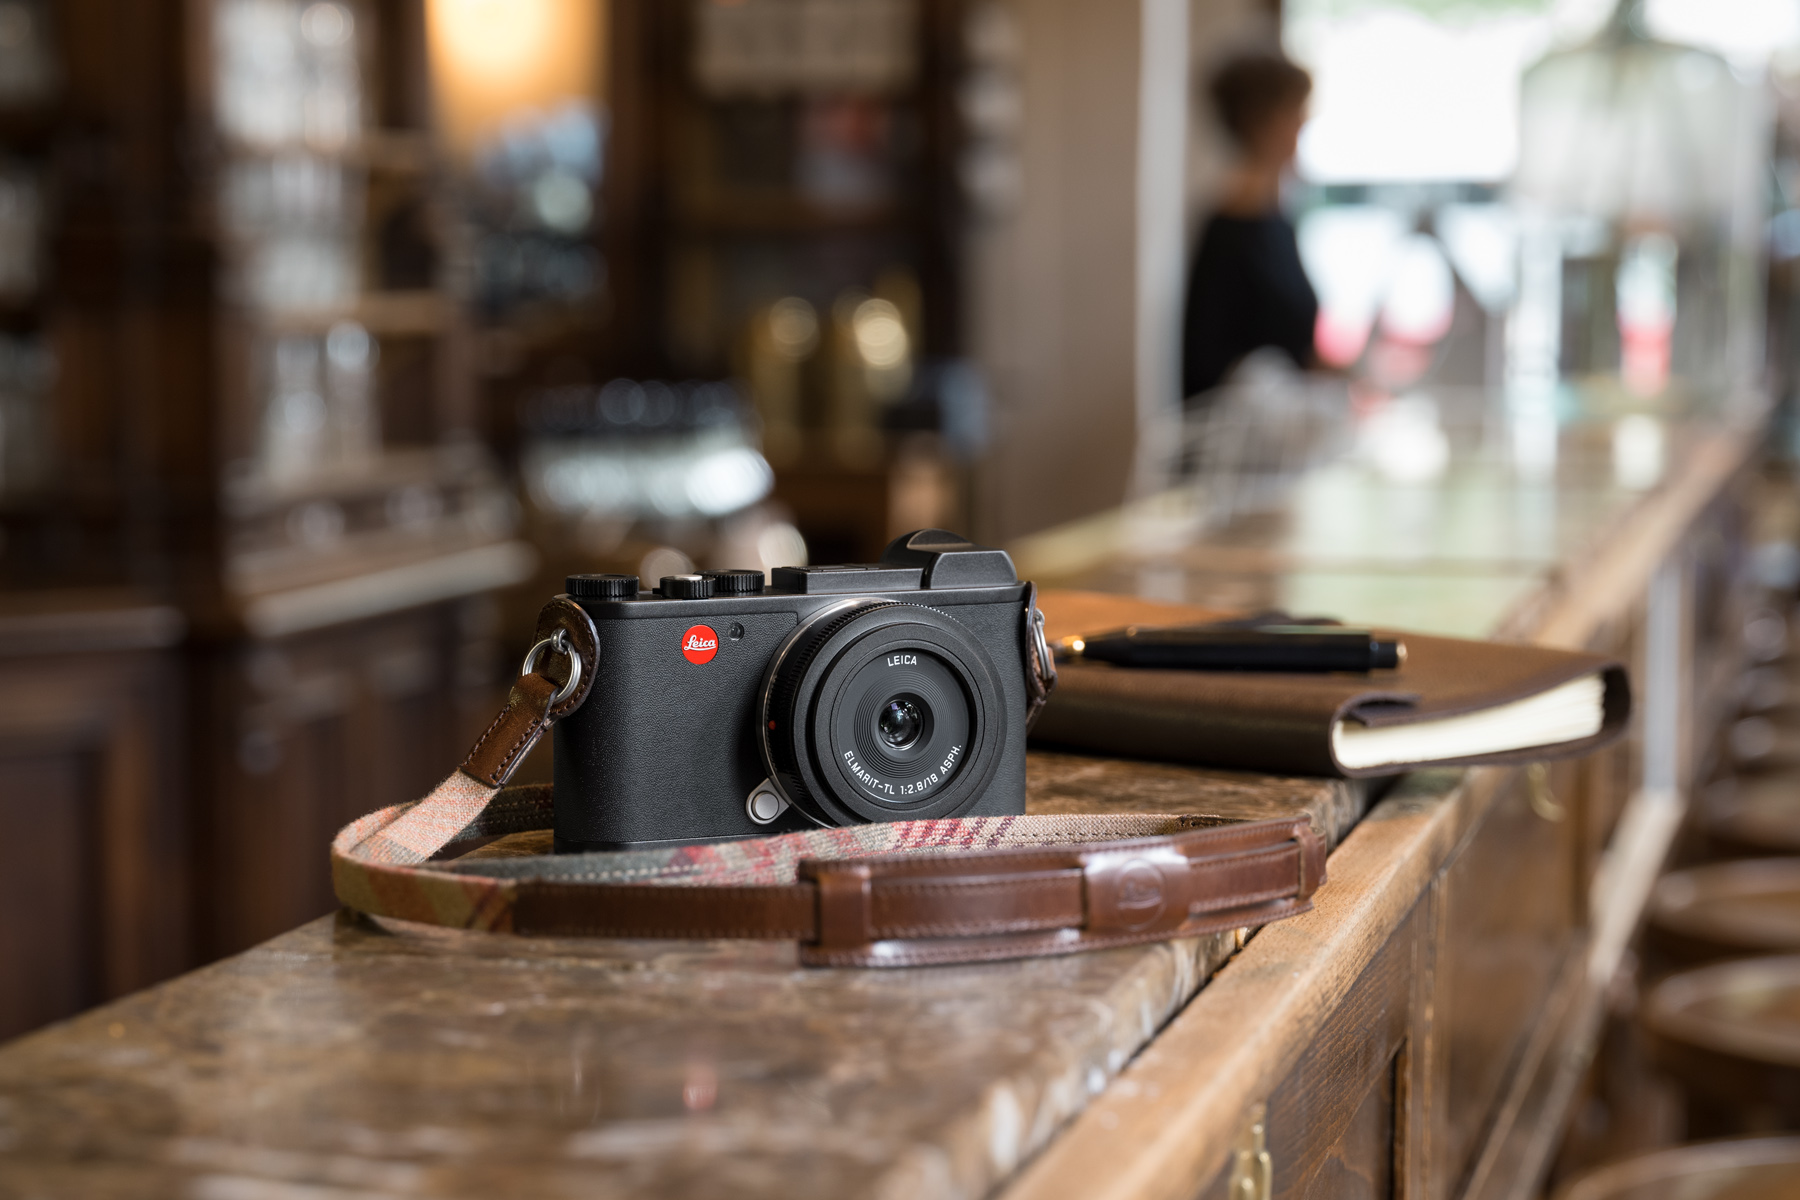 The Leica CL Digital Camera Review 2017. Is this a REAL Mini M